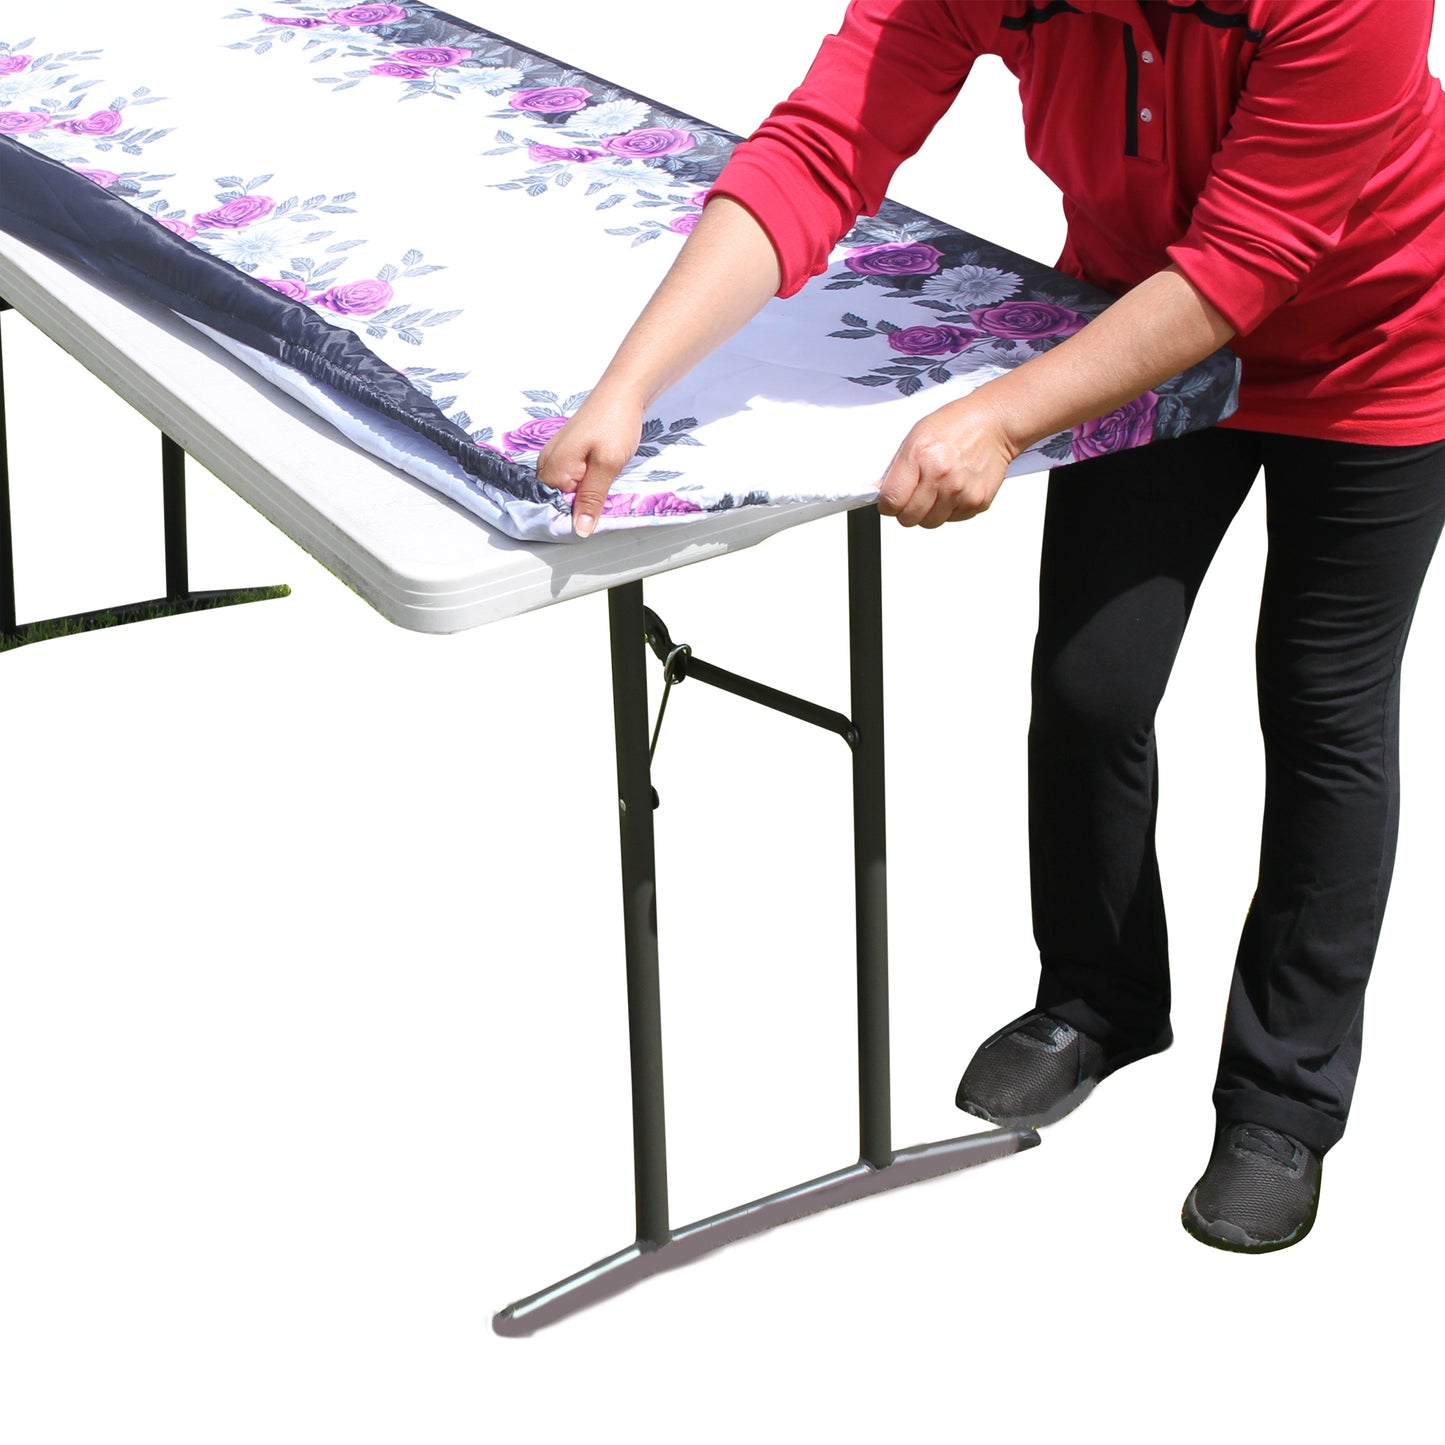 TableCloth PLUS 96" Roses Fitted Polyester Tablecloth for 8' Folding Tables Product Image